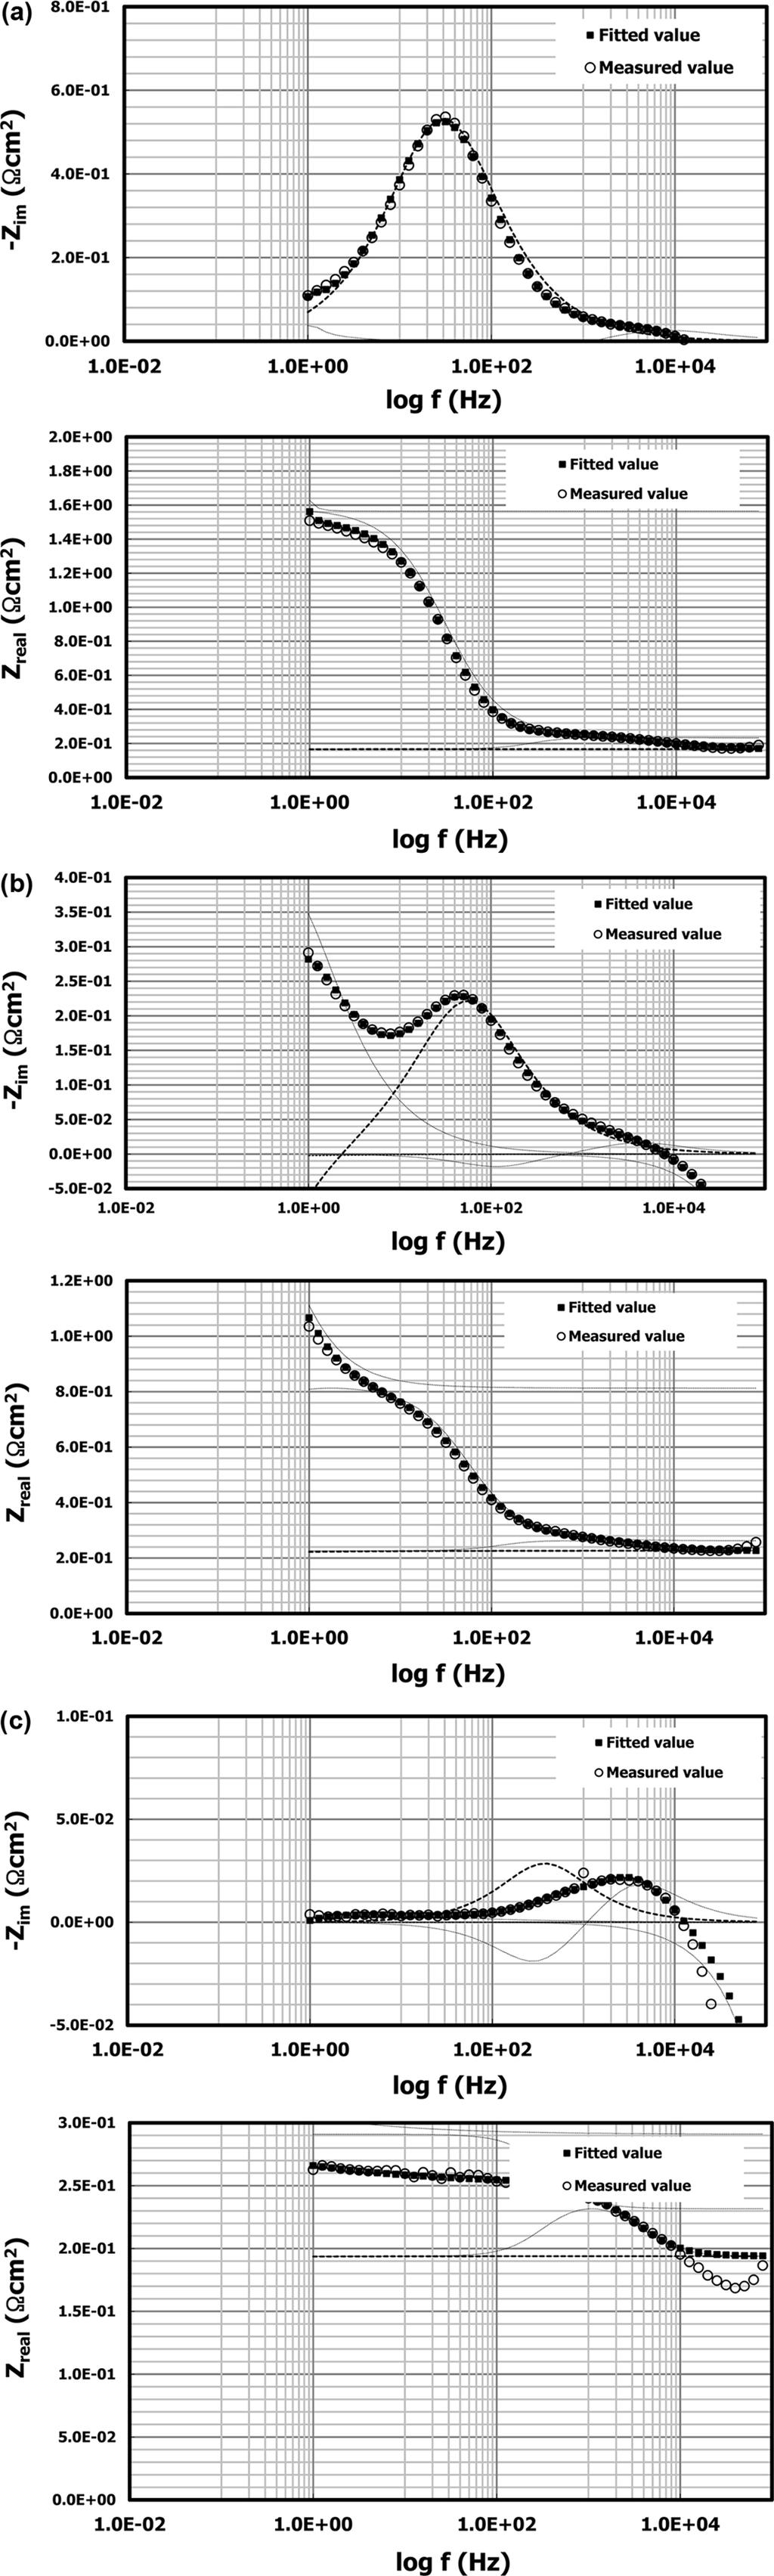 Porous Electrodes with Lower Impedance for Vanadium Redox Flow Batteries 643 The fitting results revealed that two of the resistances, R1 and R2, were equal to zero, indicating that the R1 and R2